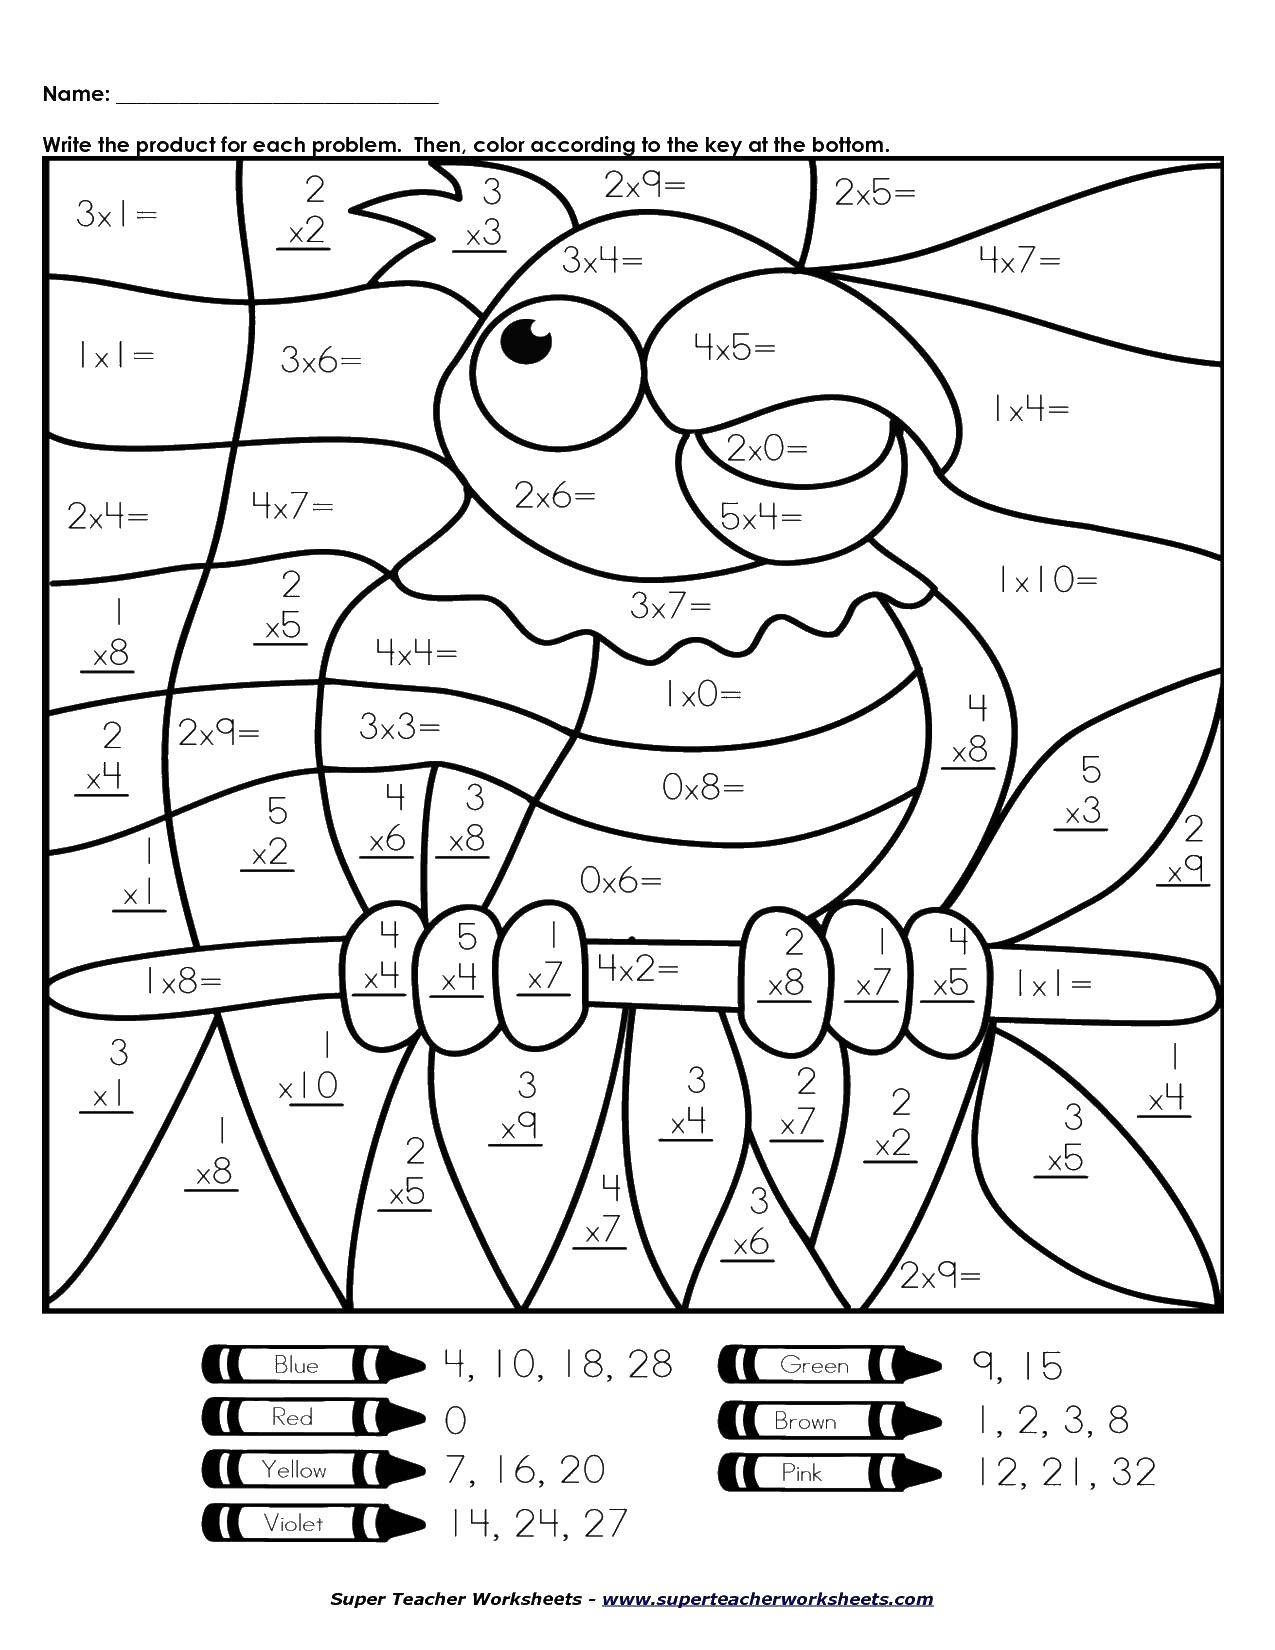 Coloring Paint a parrot solving examples. Category mathematical coloring pages. Tags:  examples, math, a parrot.